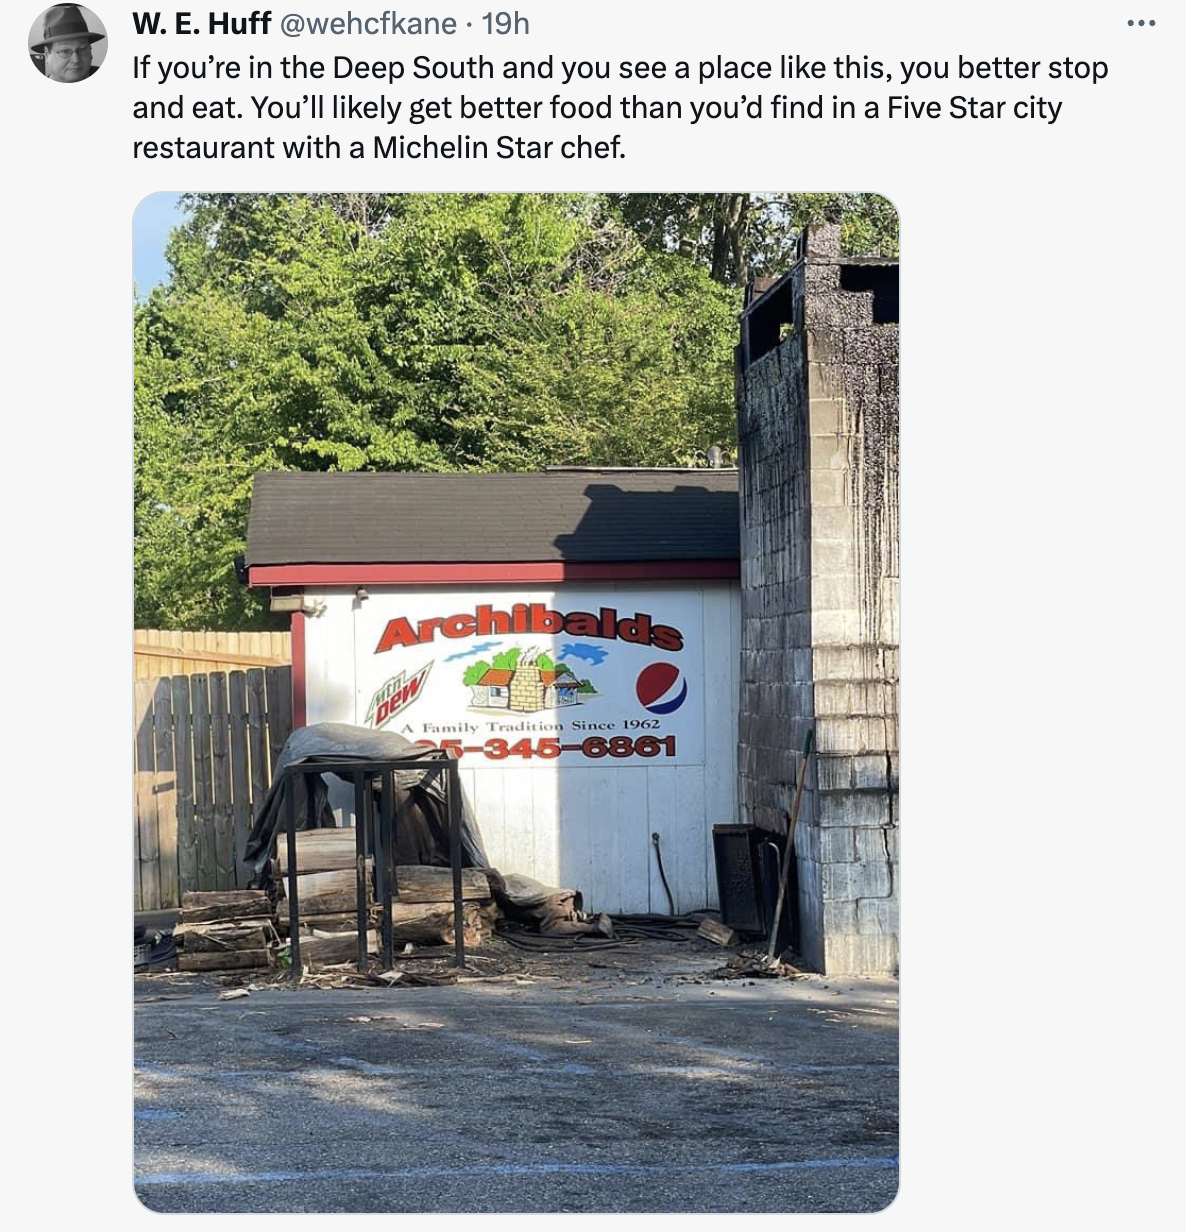 real estate - If you're in the Deep South and you see a place this, you better stop and eat. You'll ly get better food than you'd find in a Five Star city restaurant with a Michelin Star chef.